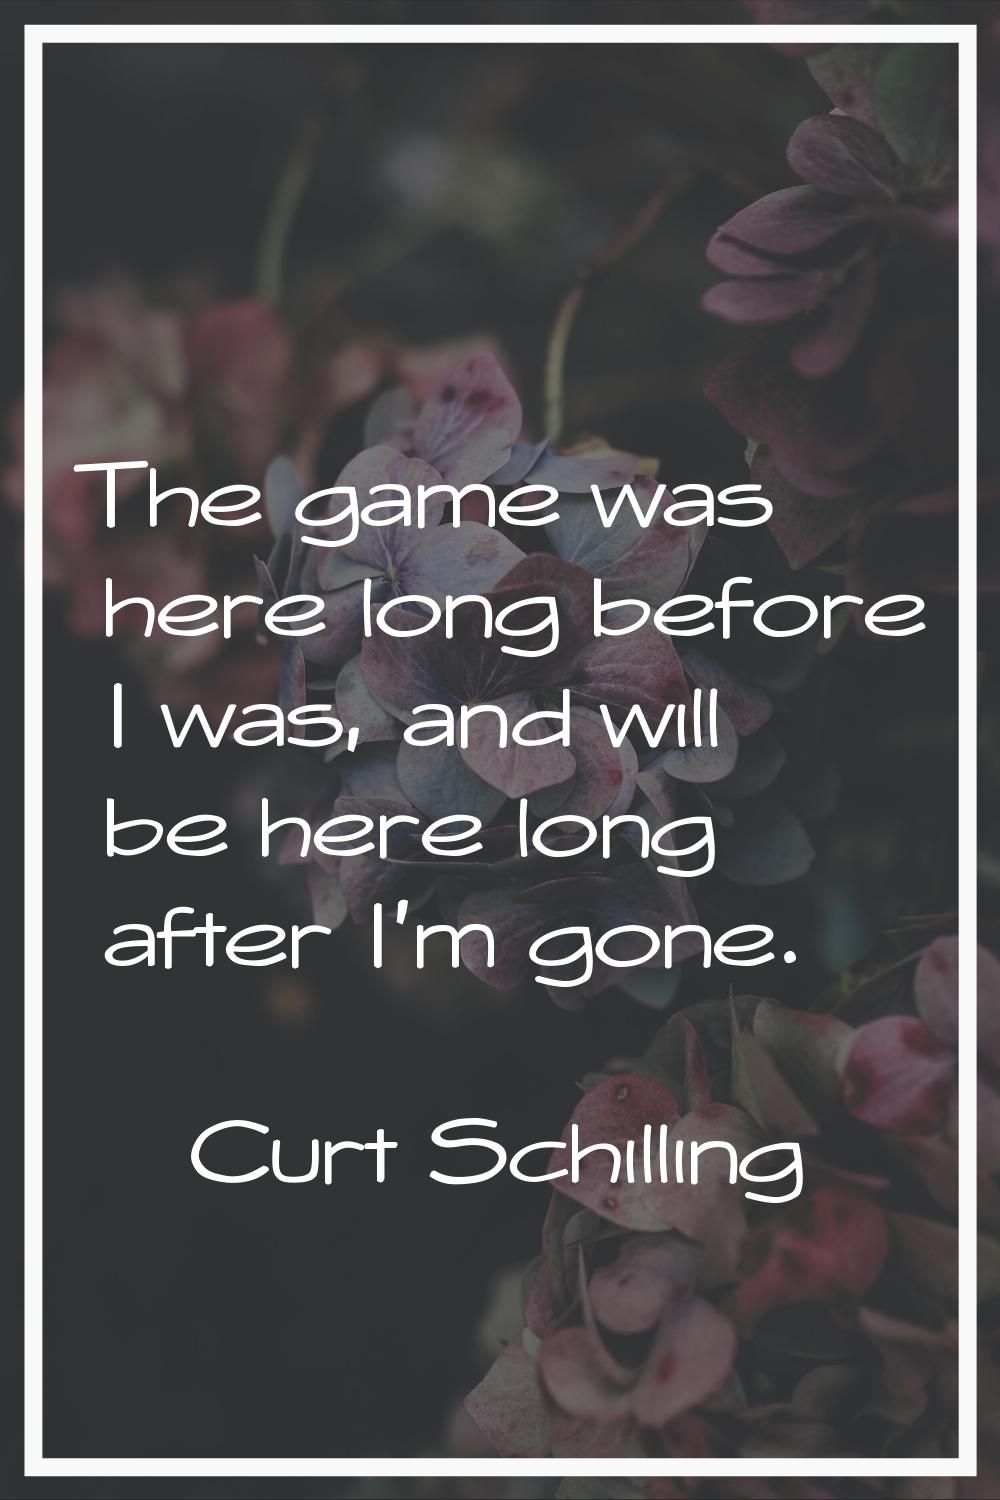 The game was here long before I was, and will be here long after I'm gone.